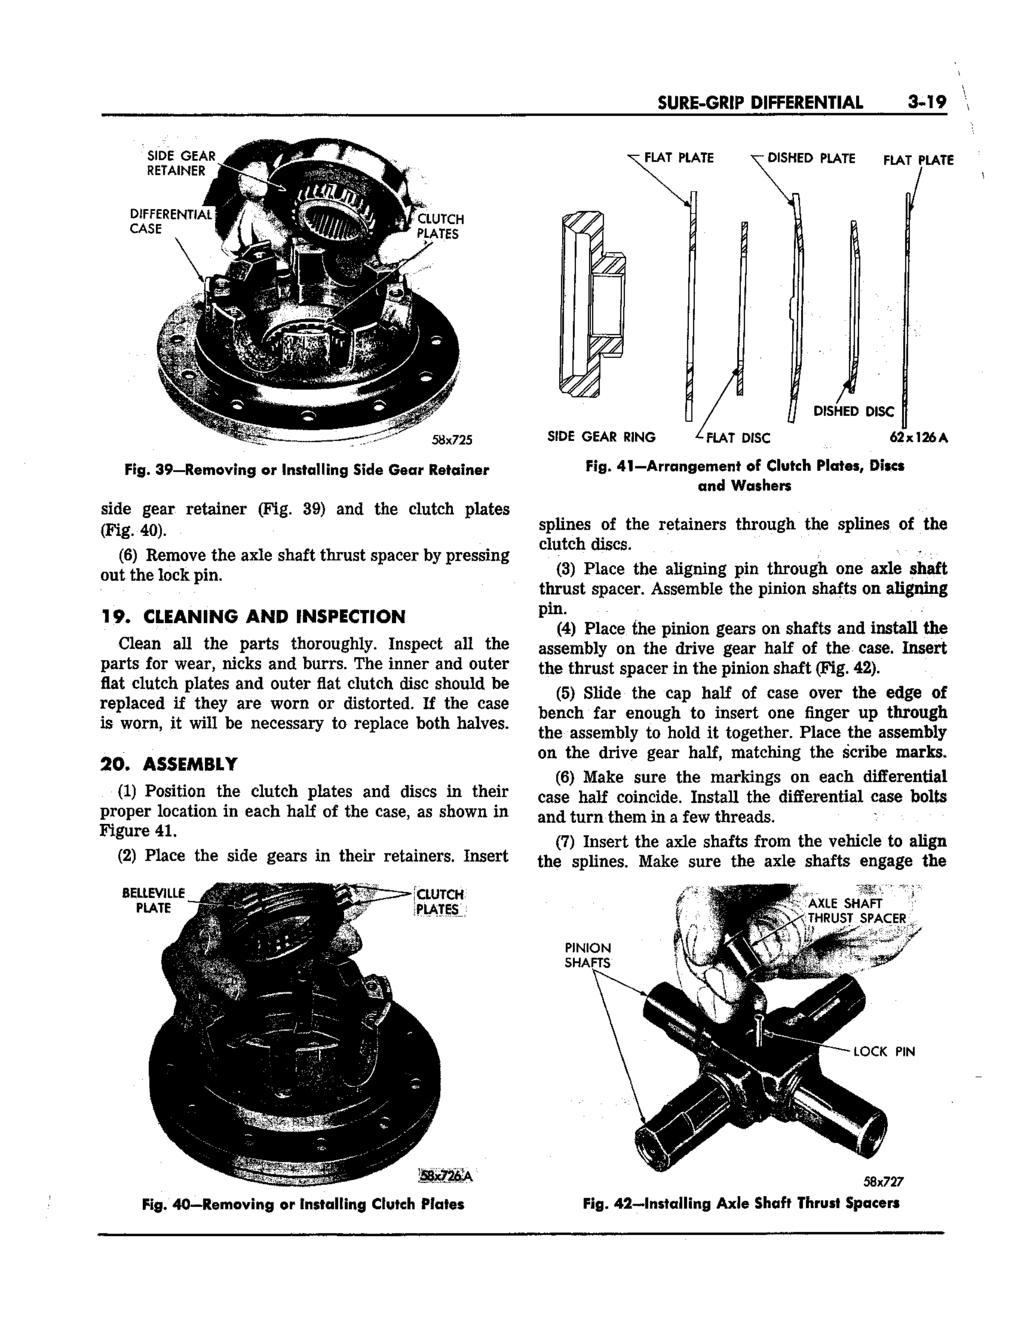 SURE-GRIP DIFFERENTIAL 3-19 X FLAT PLATE DISHED PLATE FLAT PLATE 58x725 Fig. 39 Removing or Installing Side Gear Retainer side gear retainer (Fig. 39) and the clutch plates (Fig. 40).